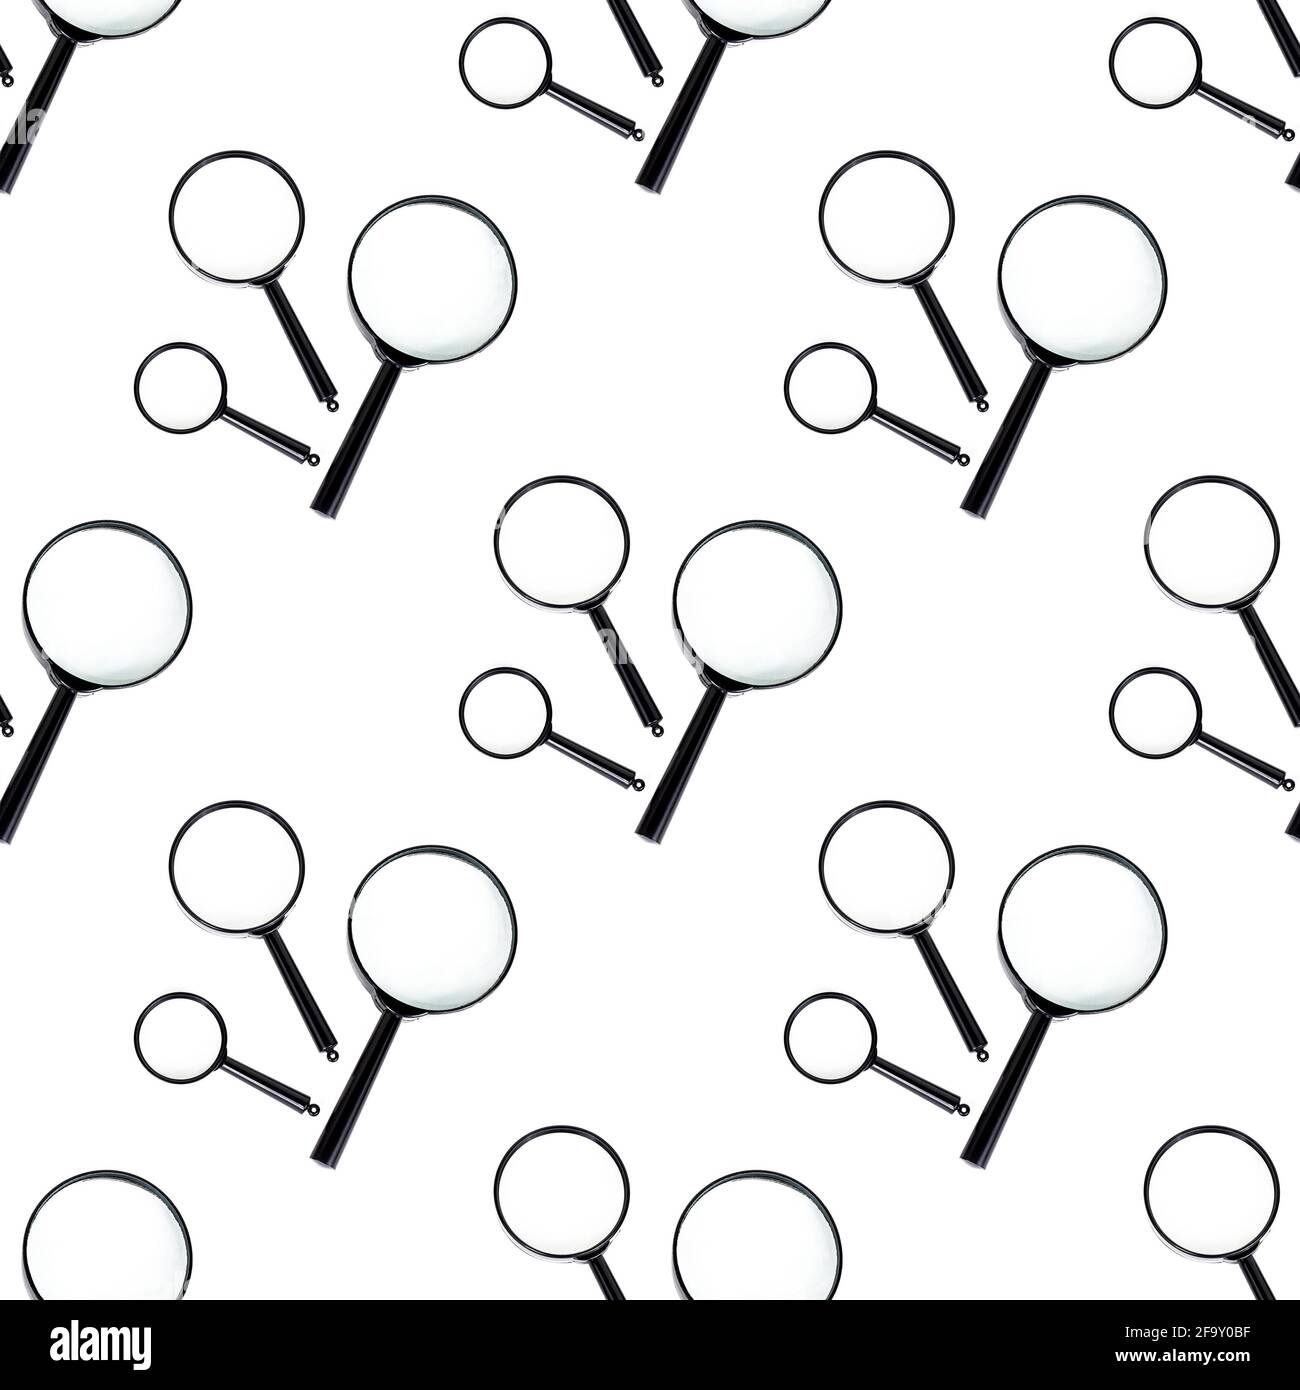 Magnifying glass repeat seamless pattern on white background. Stock Photo